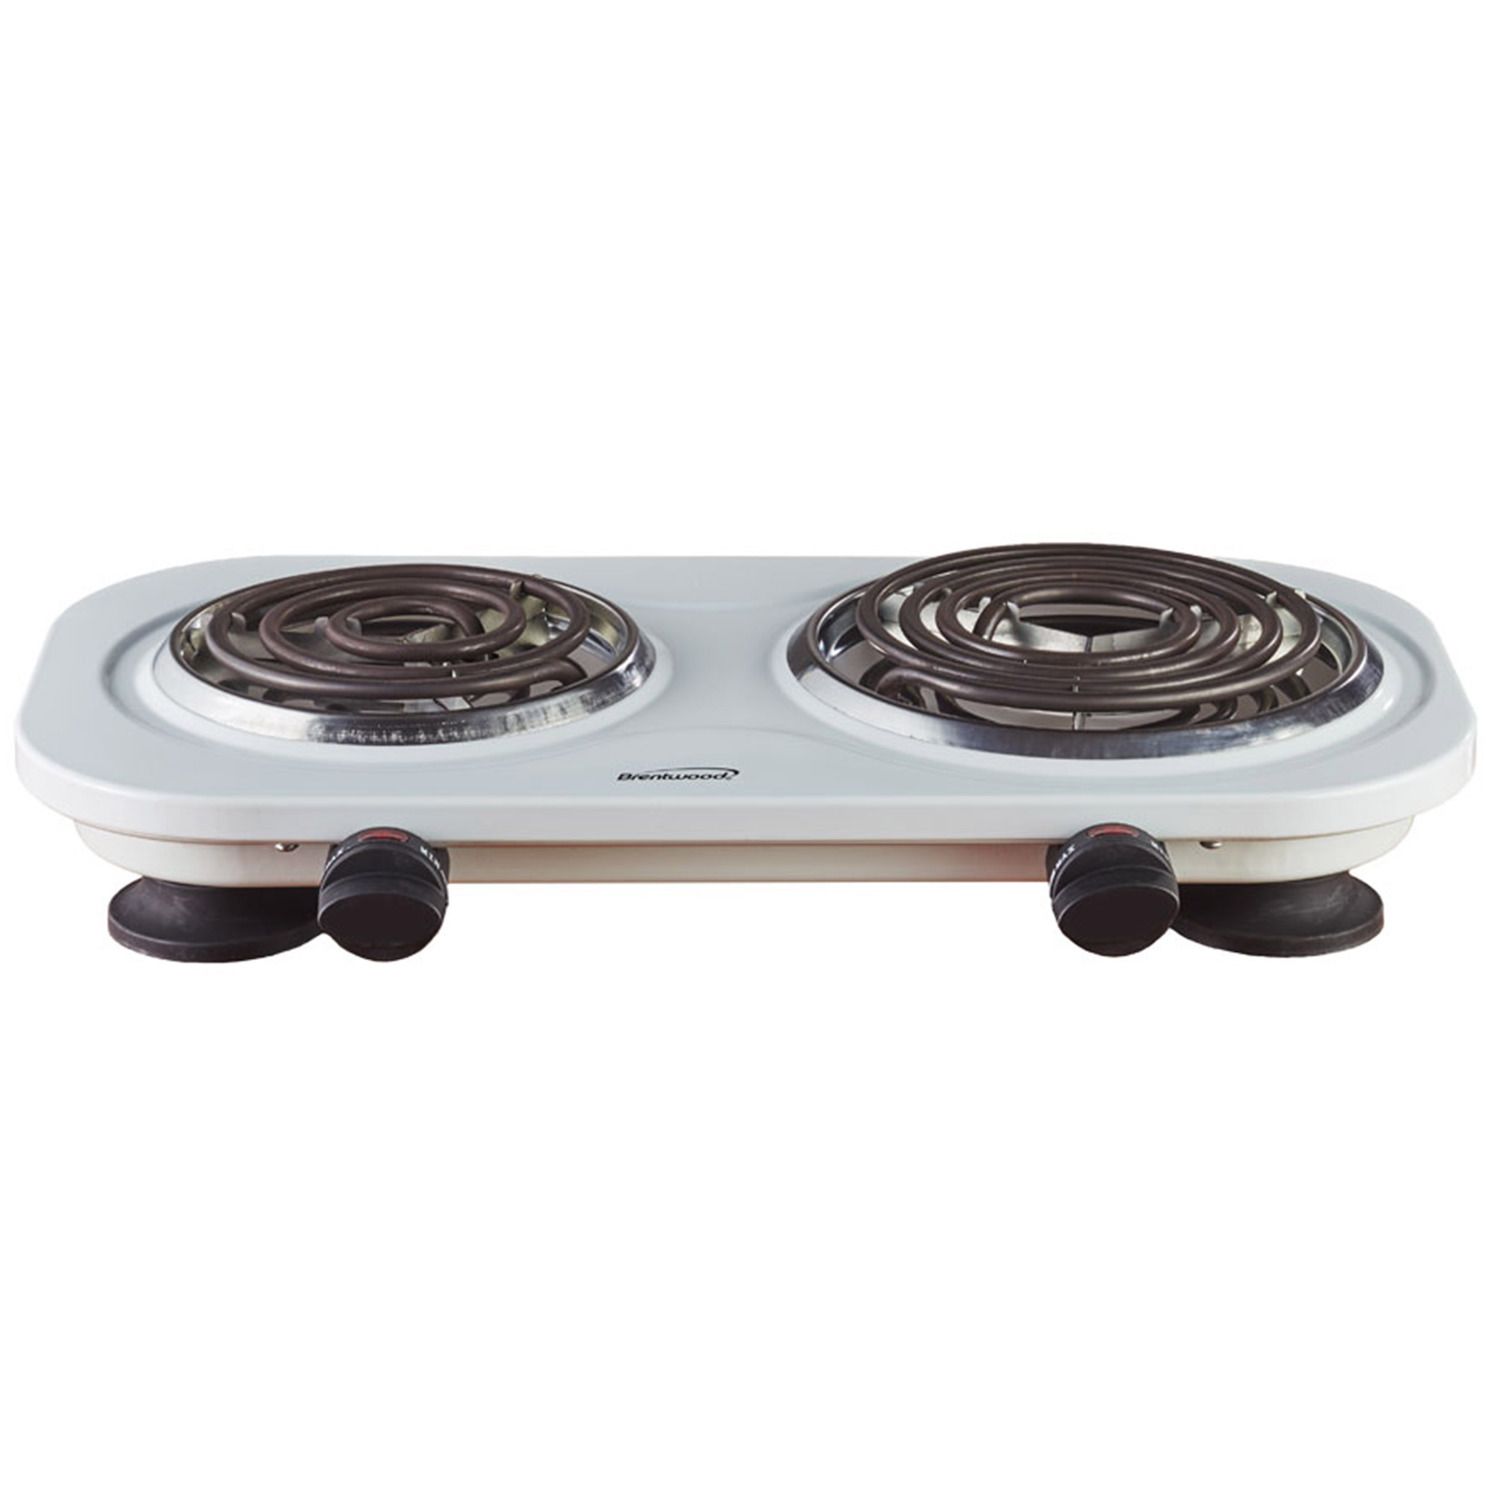 MegaChef Ceramic Infrared Double Cooktop